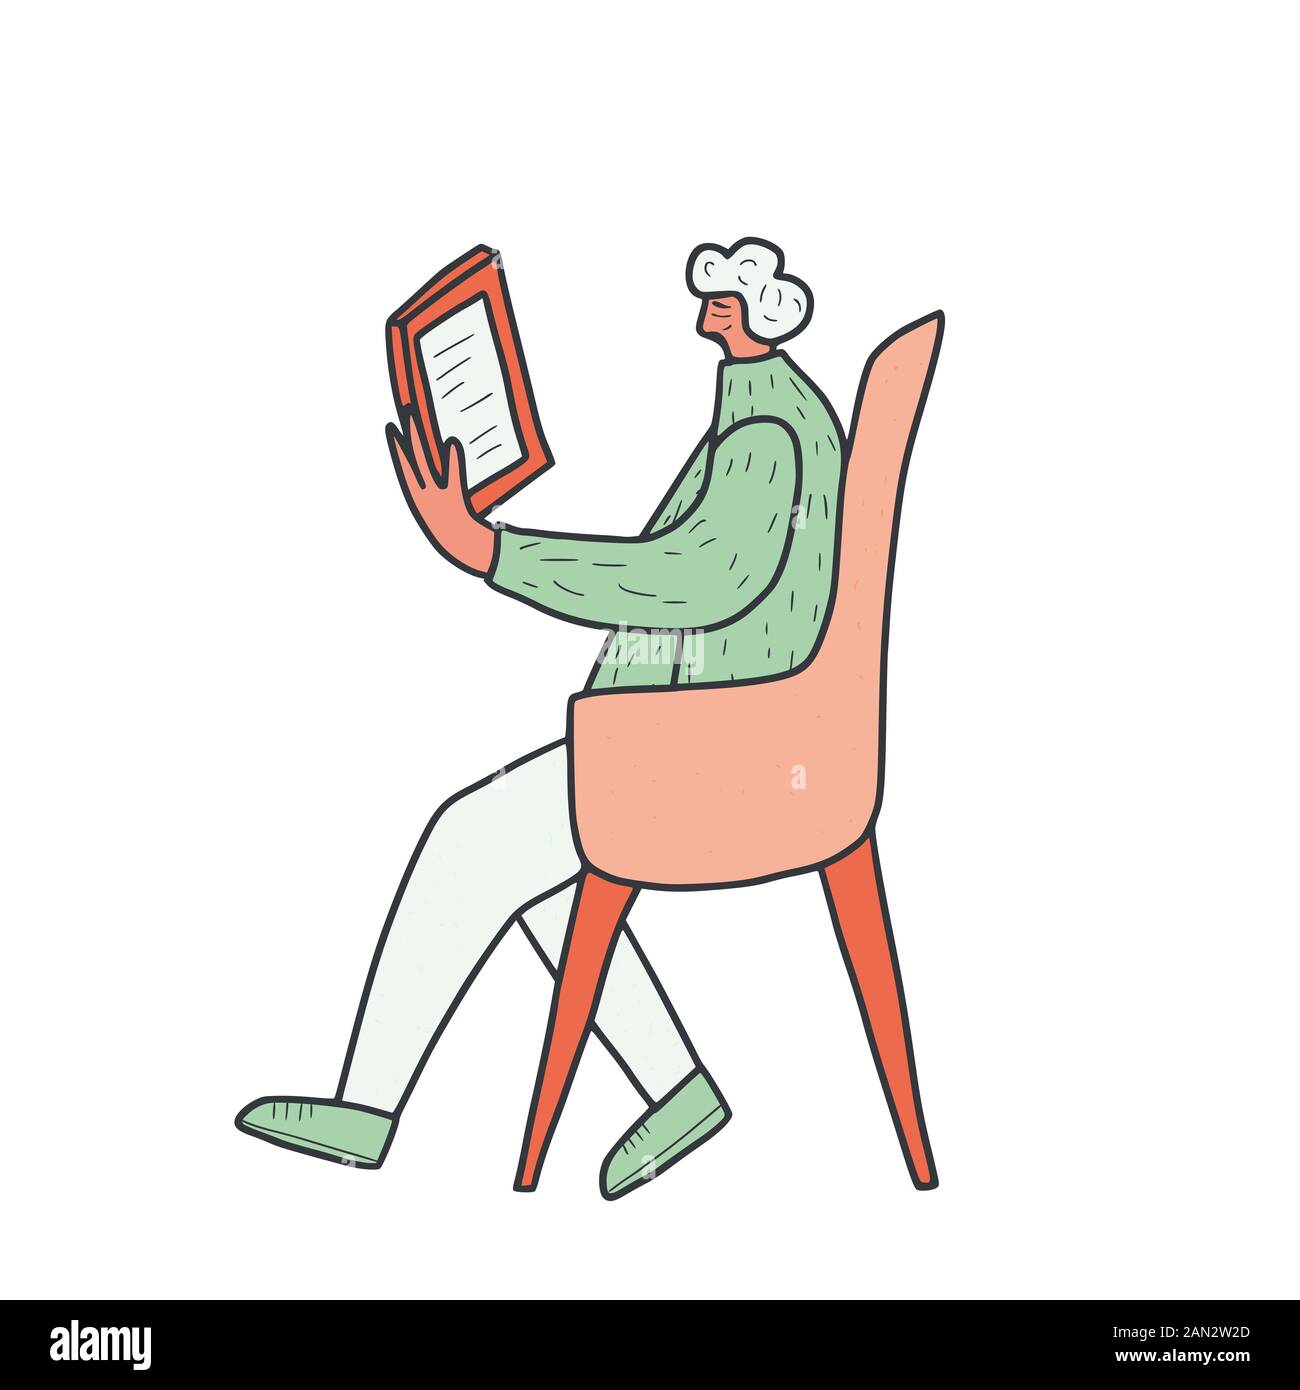 Mature person sitting in the chair at her tablet. Senior woman reading an electronic book. Vector illustration. Stock Vector